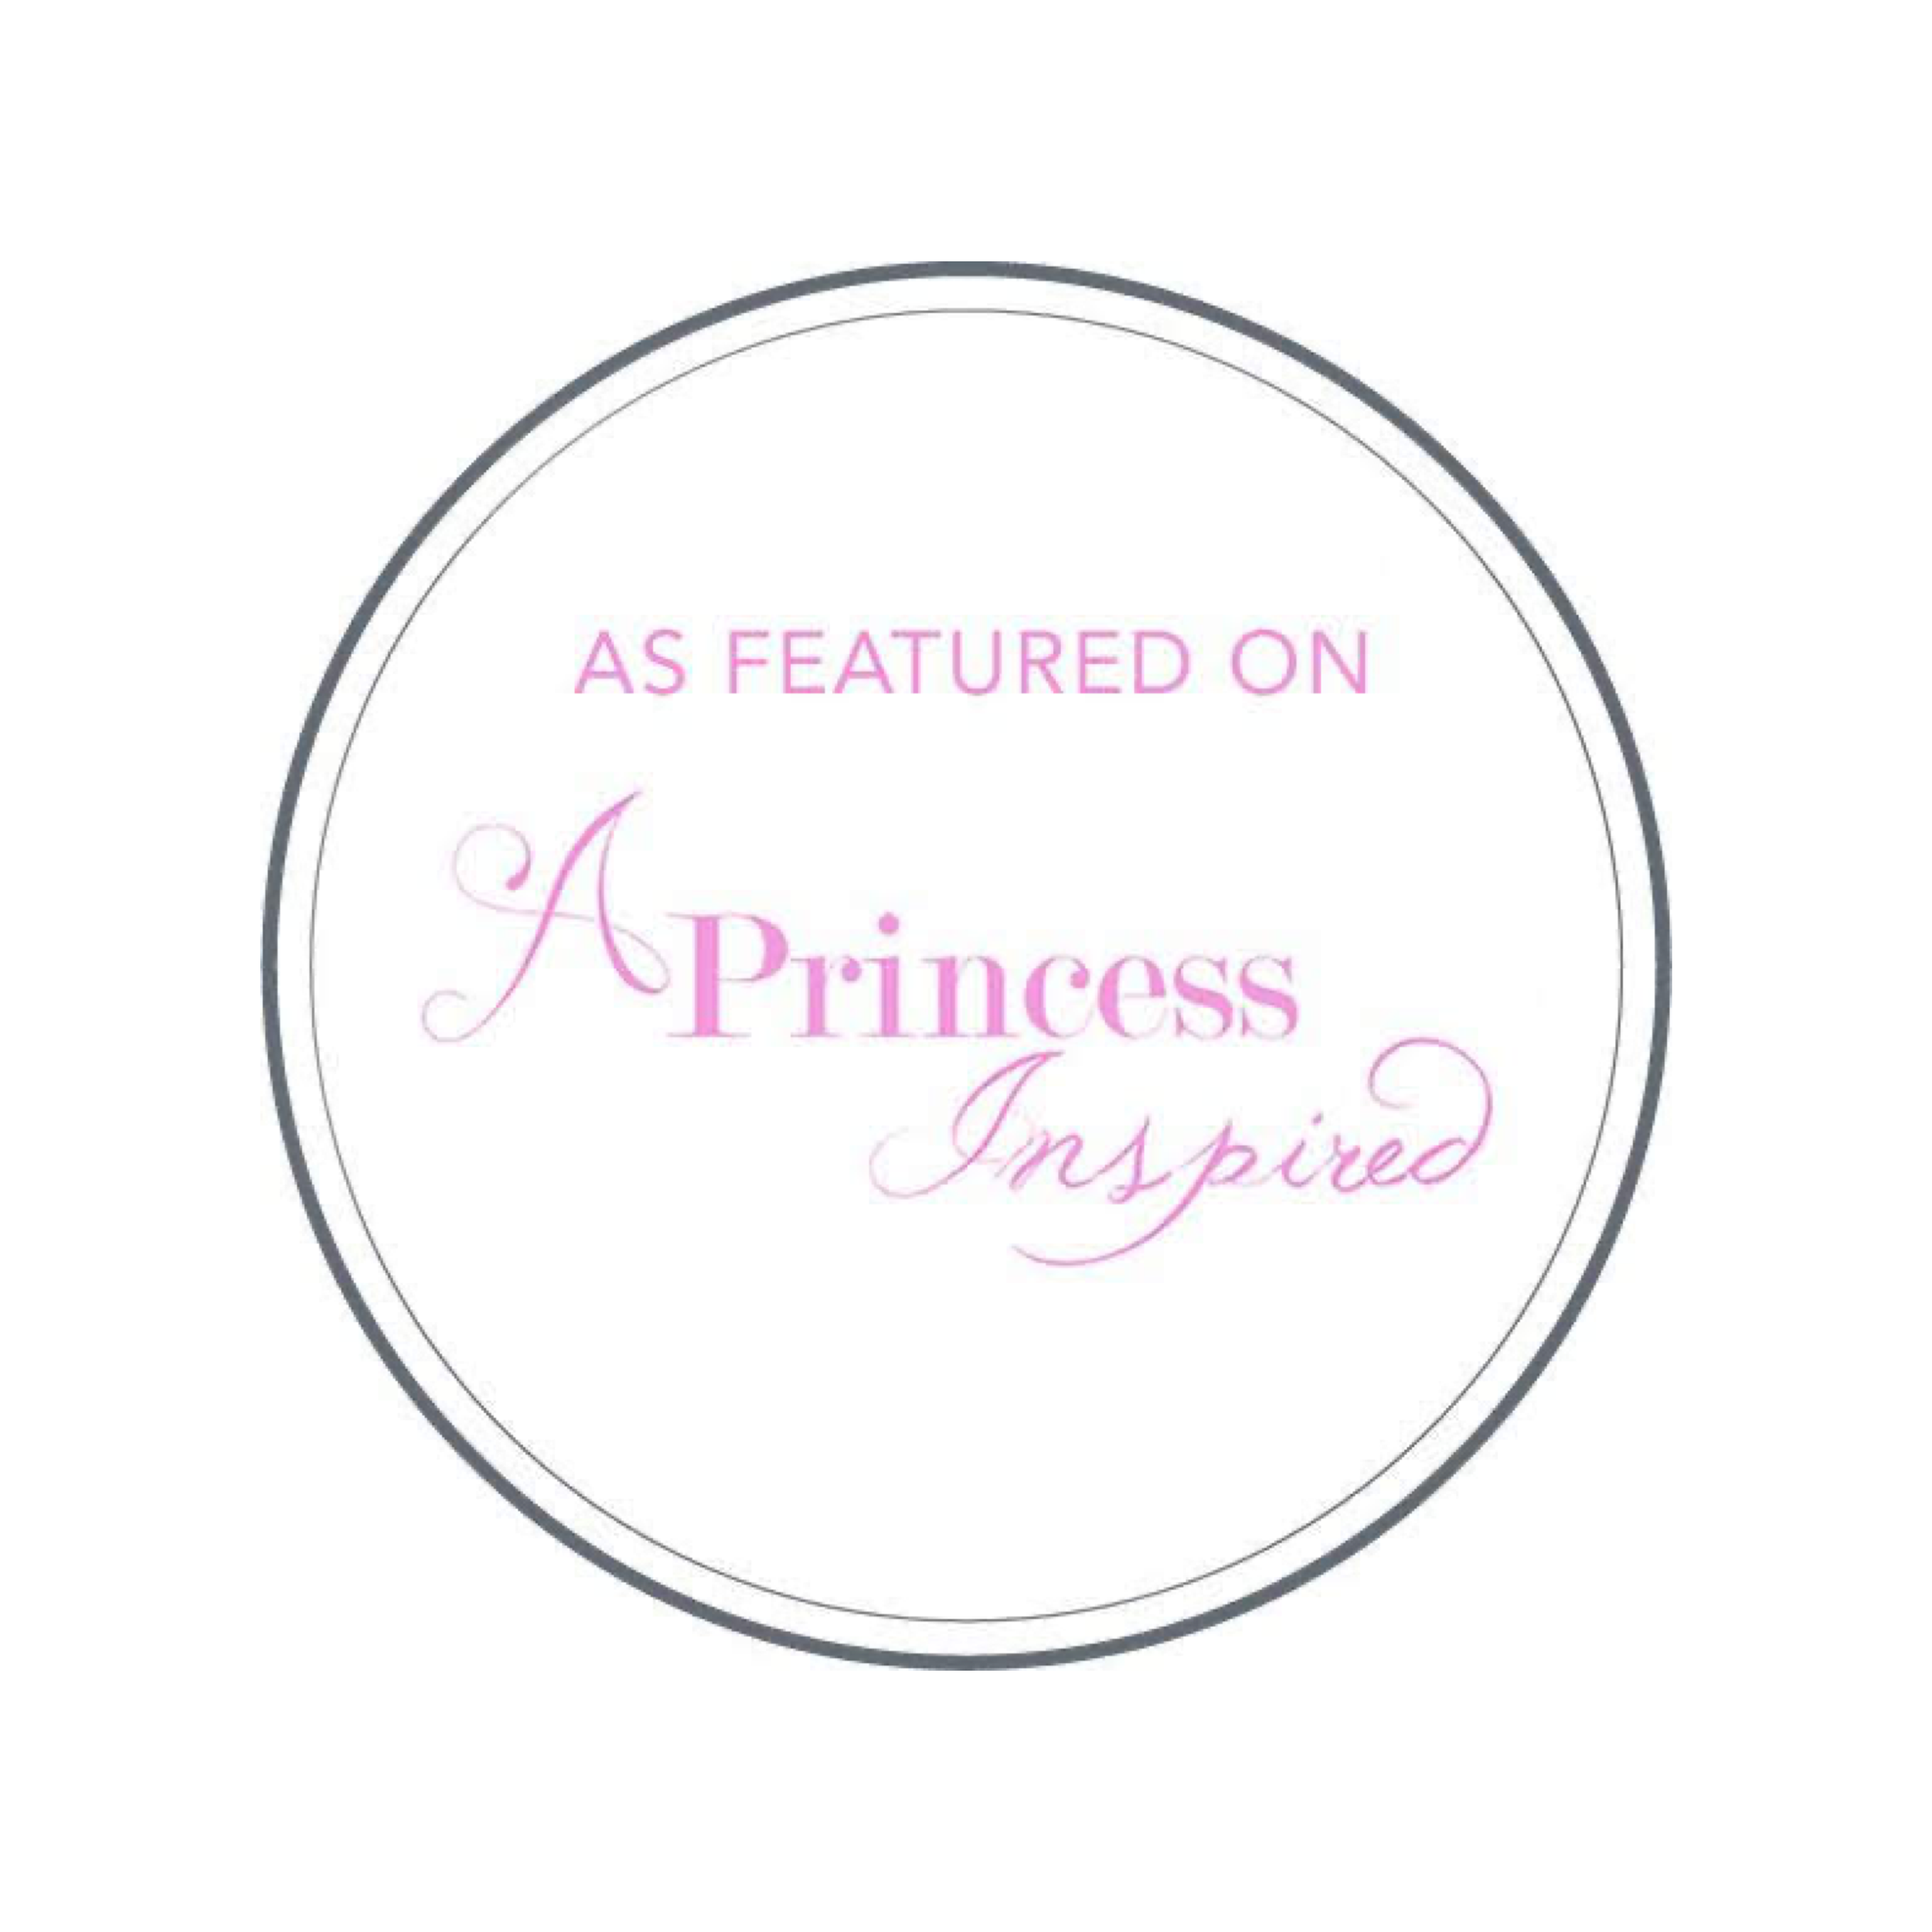 A Princess Inspired Feature